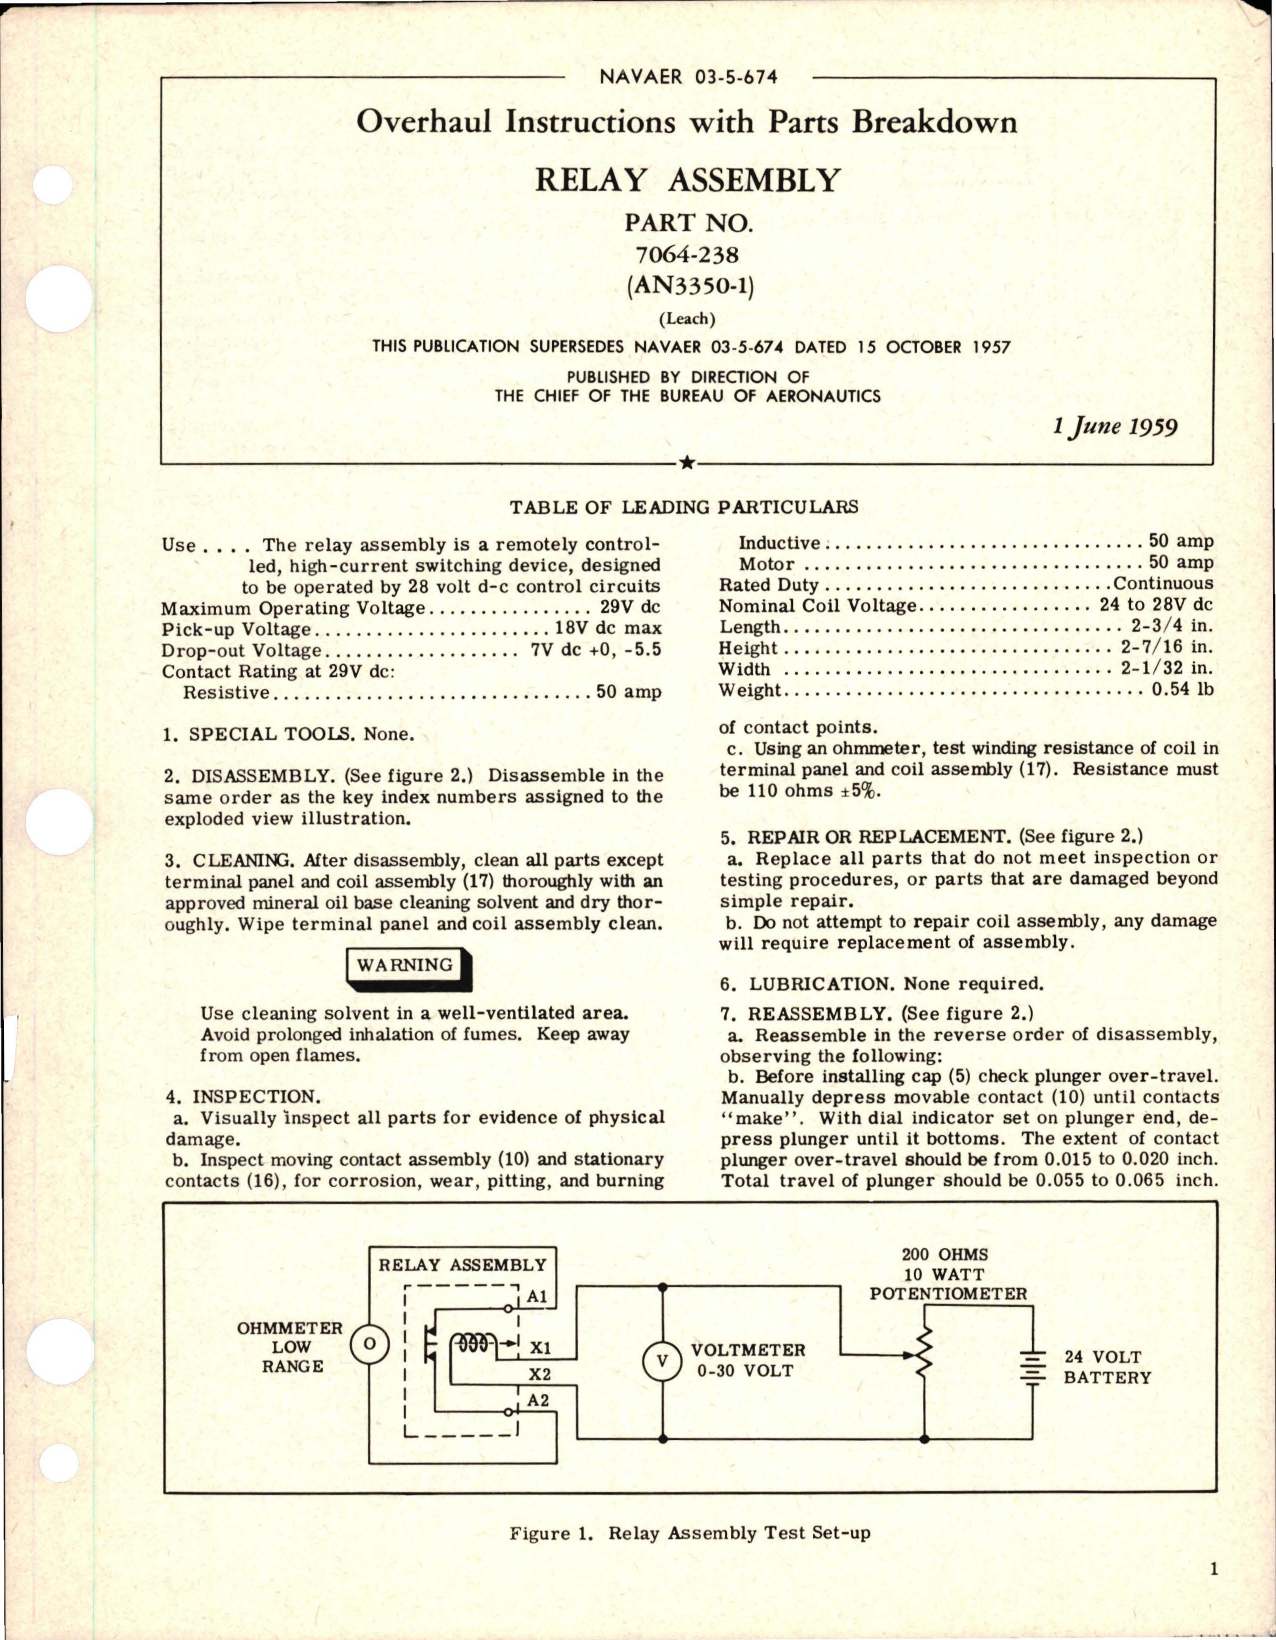 Sample page 1 from AirCorps Library document: Overhaul Instructions with Parts Breakdown for Relay Assembly - Part 7064-238 and AN3350-1